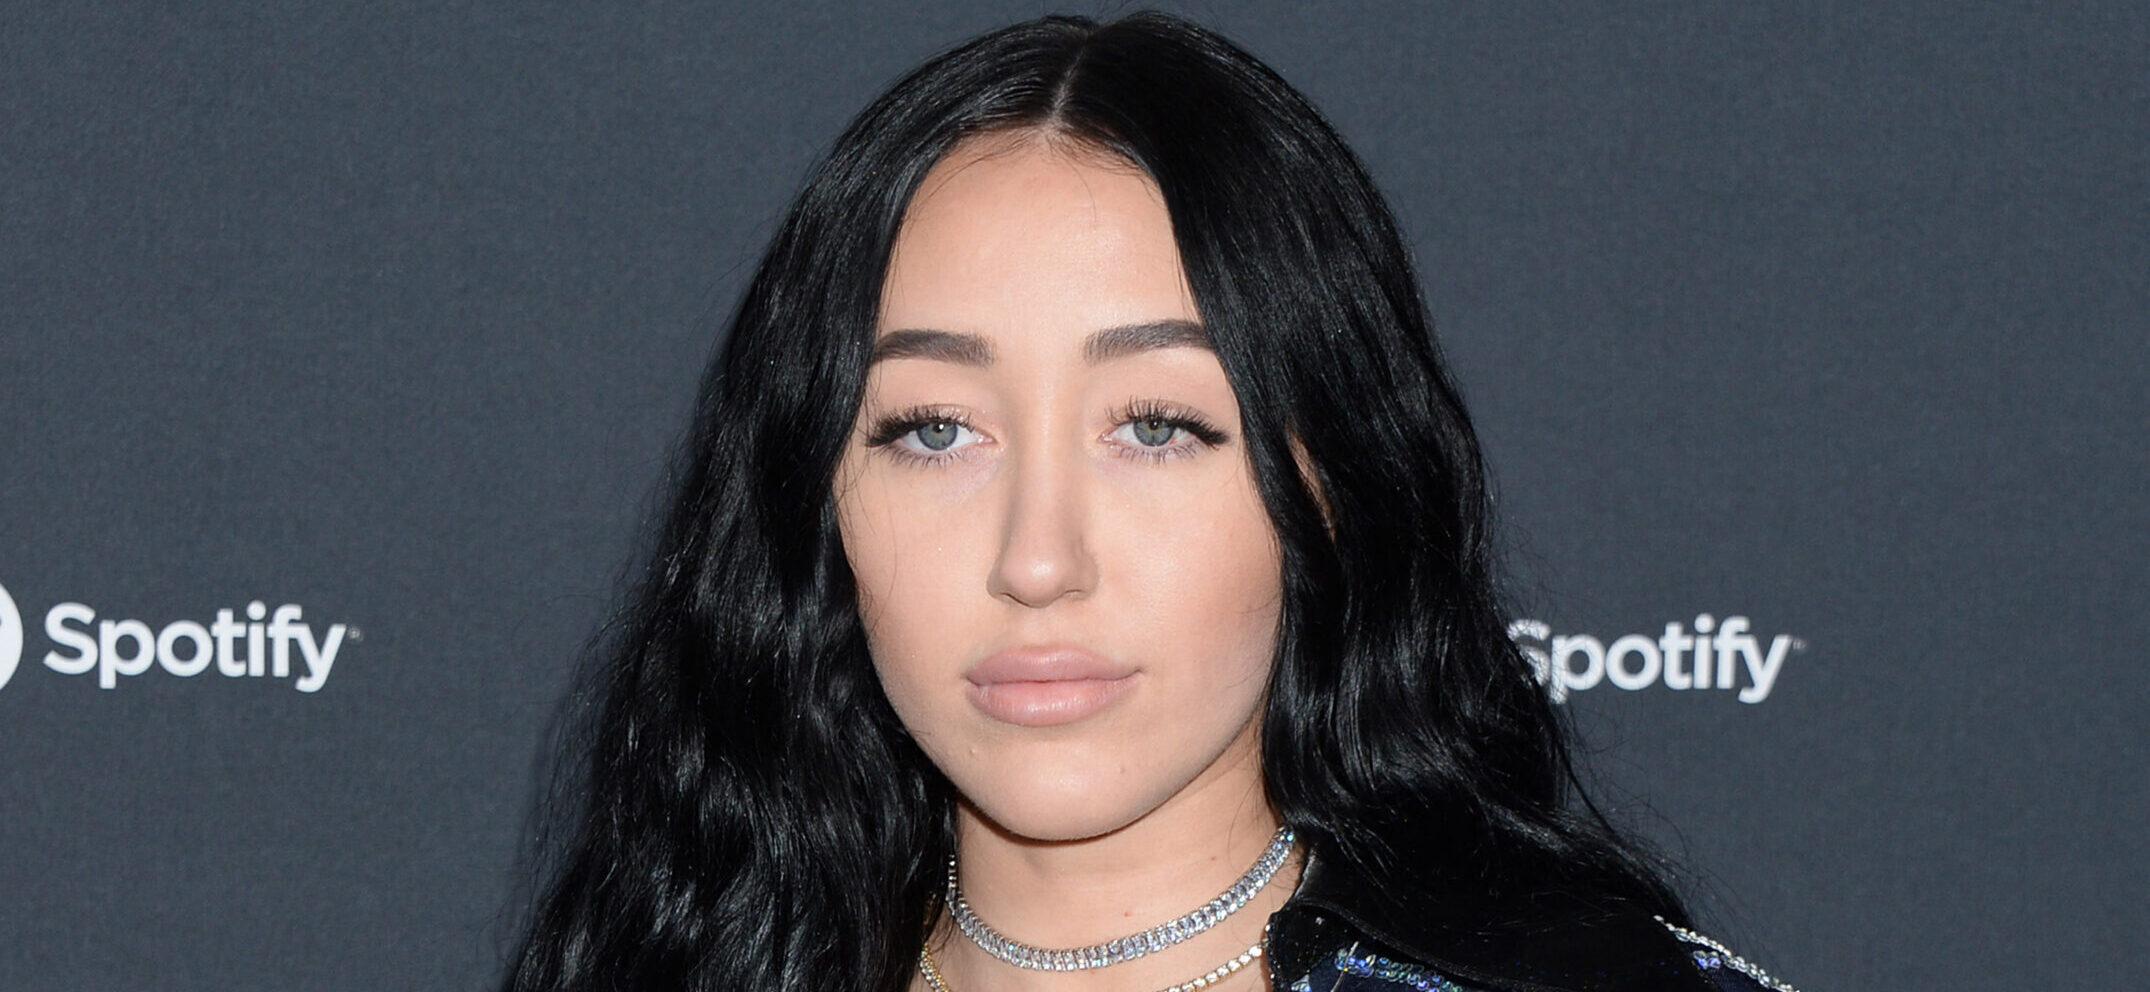 Noah Cyrus Reportedly Taking Dad Billy Ray Cyrus’ Side After Divorce From Mom Tish Cyrus